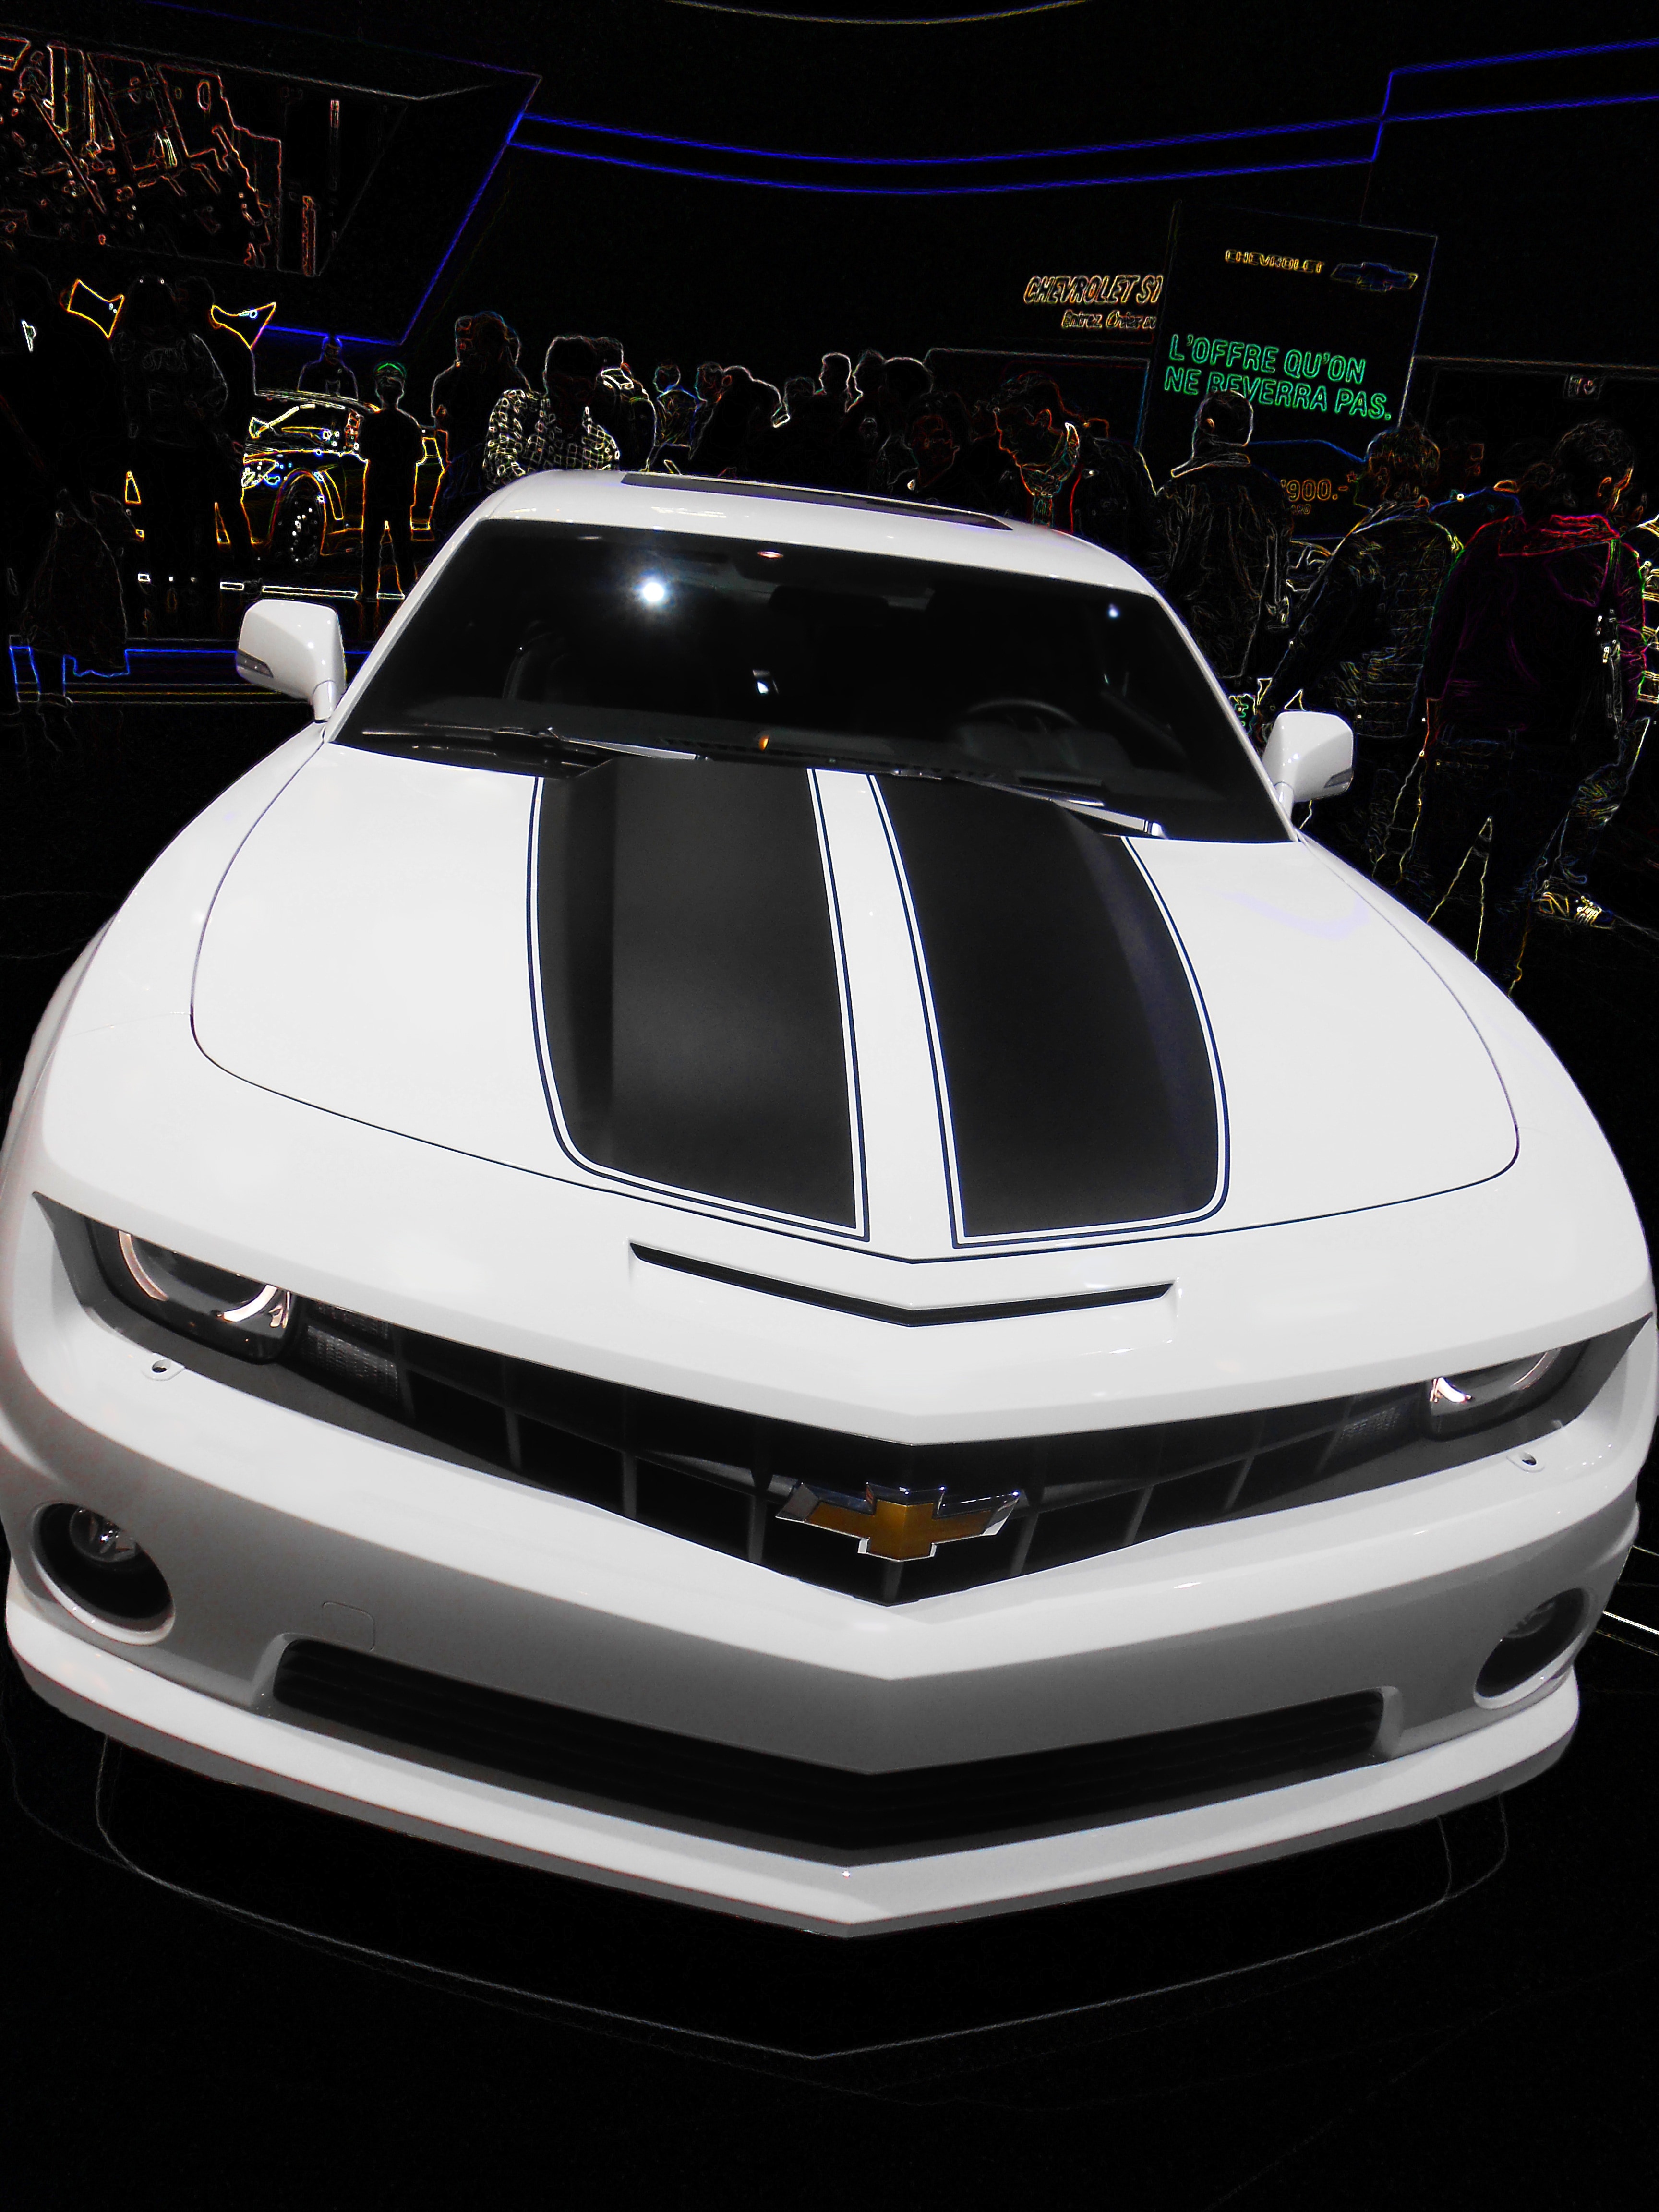 white and black Chevrolet Camaro with people gathering at motor show